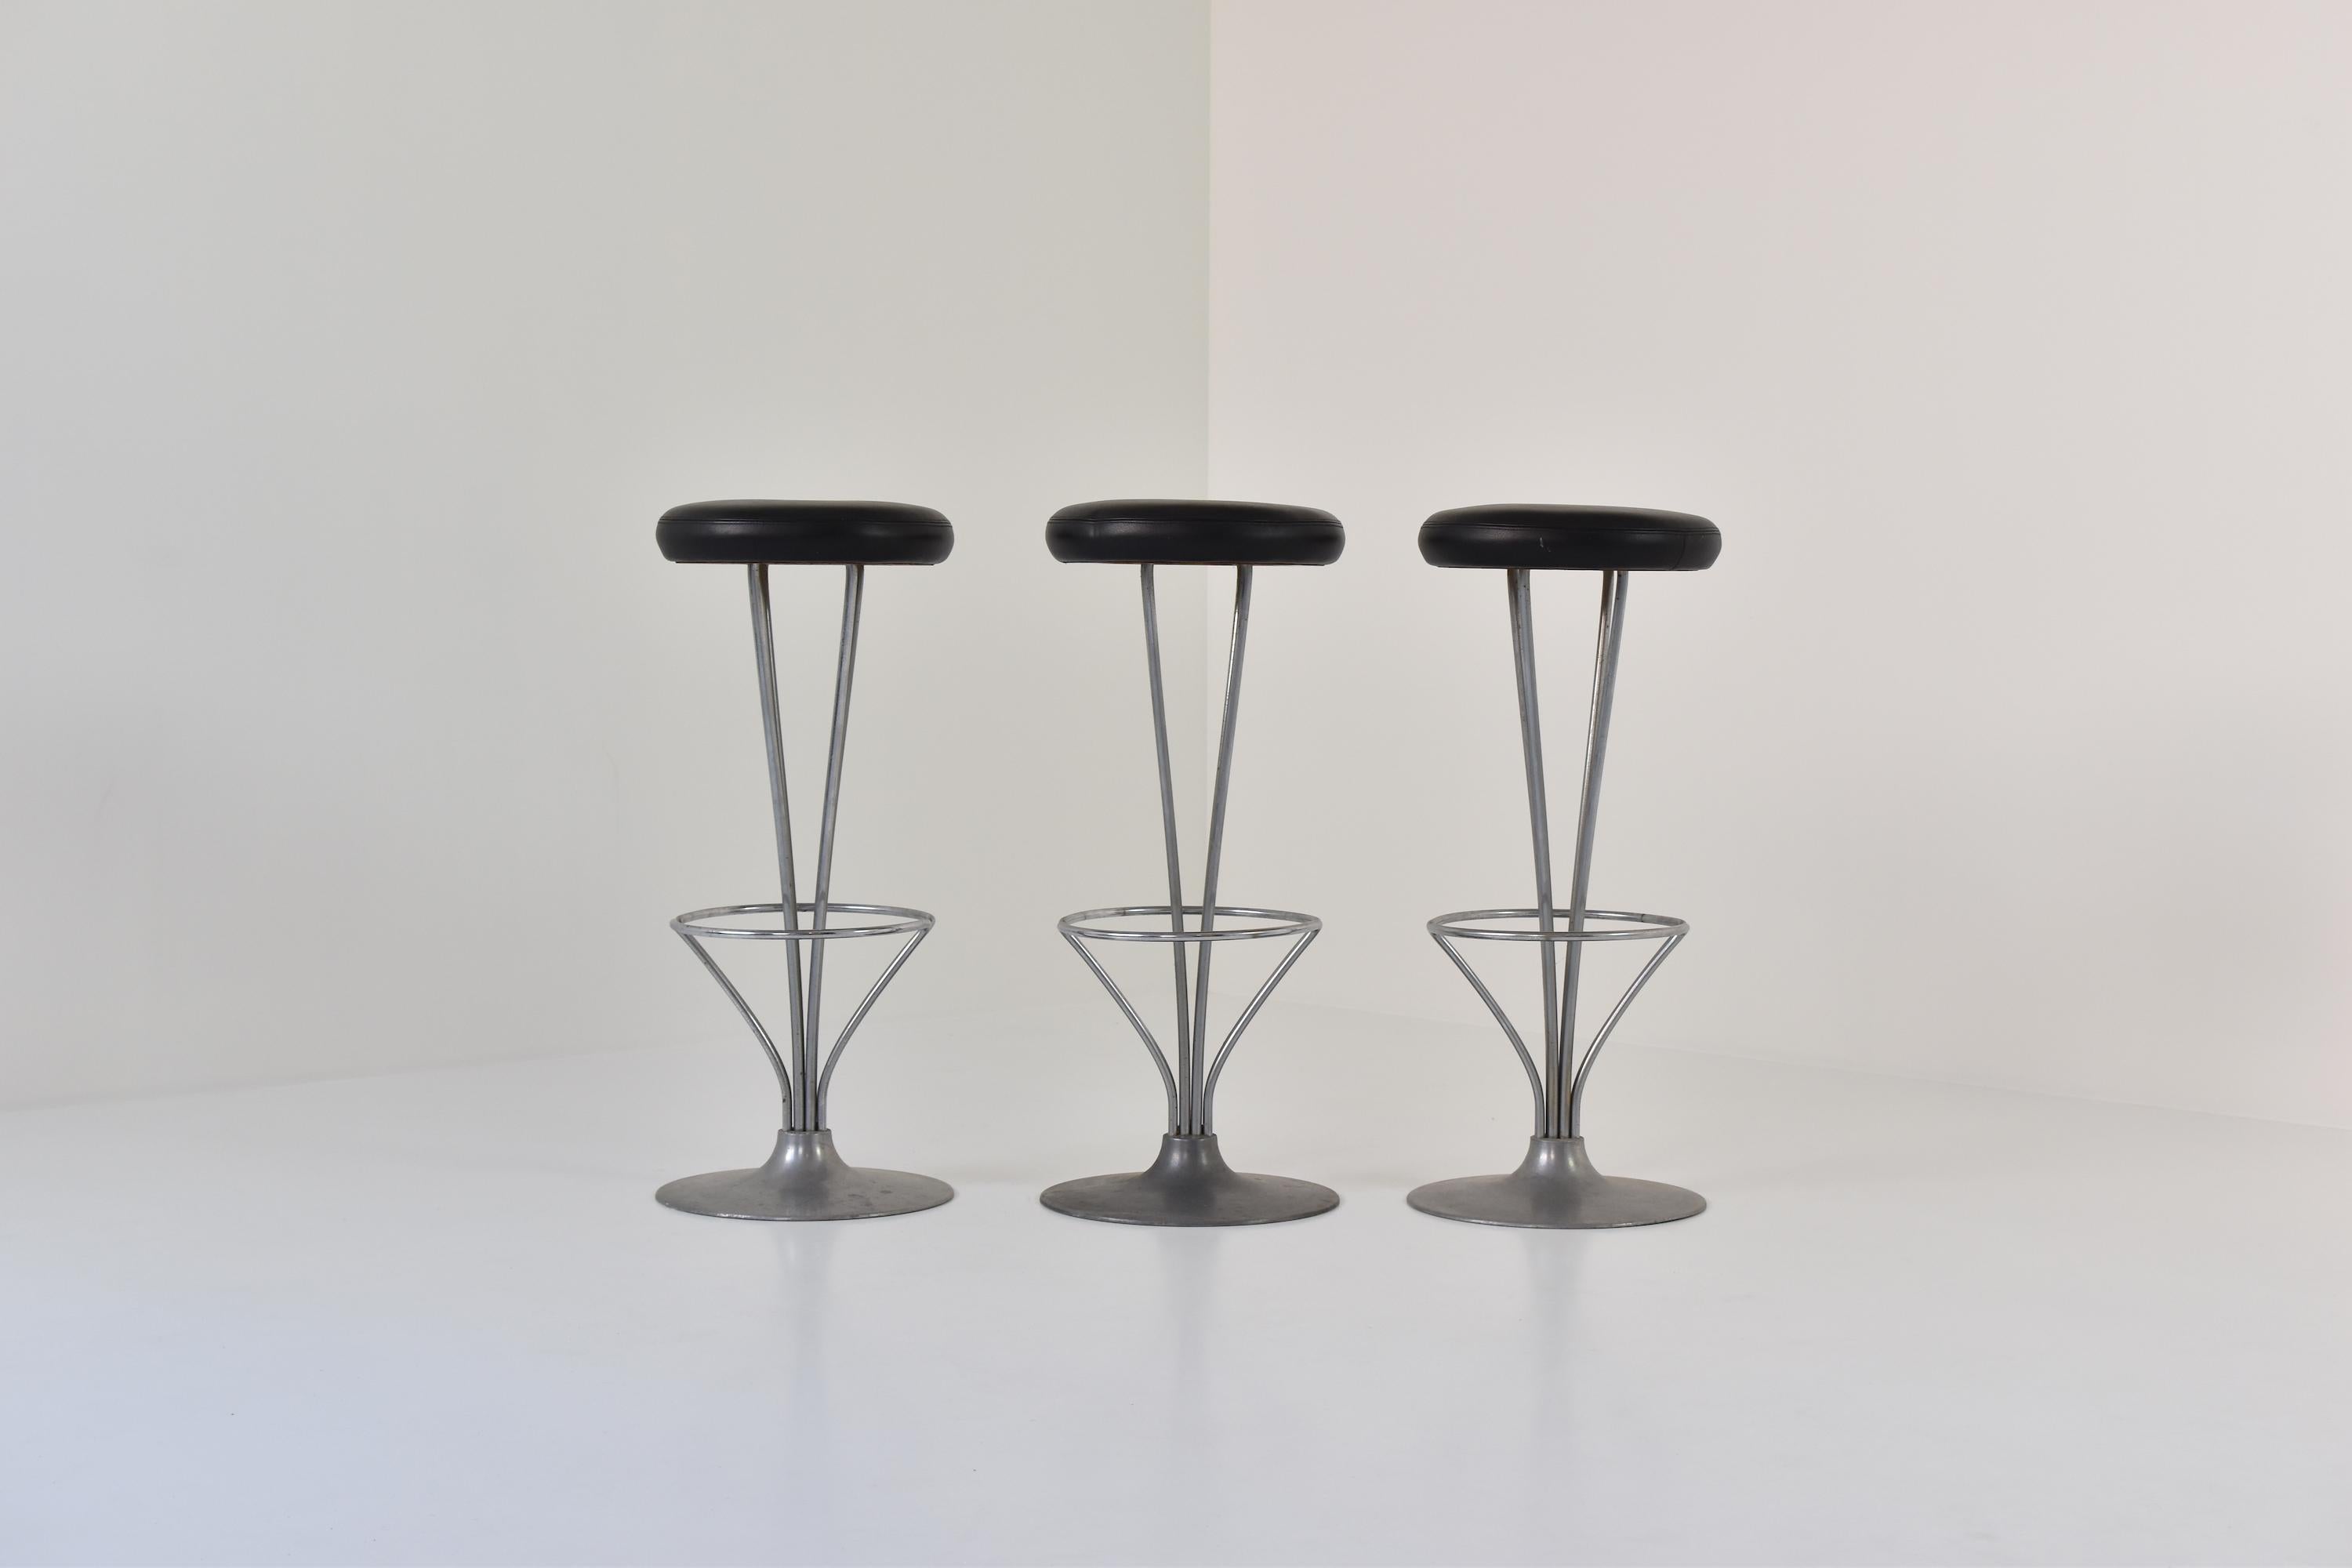 Lovely set of three bar stools by Piet Hein for Fritz Hansen, Denmark, 1960s. These stools have chrome-plated frames and a brushed aluminum base with the original black leather upholstery. One of the best modern bar stool designs of the 20th